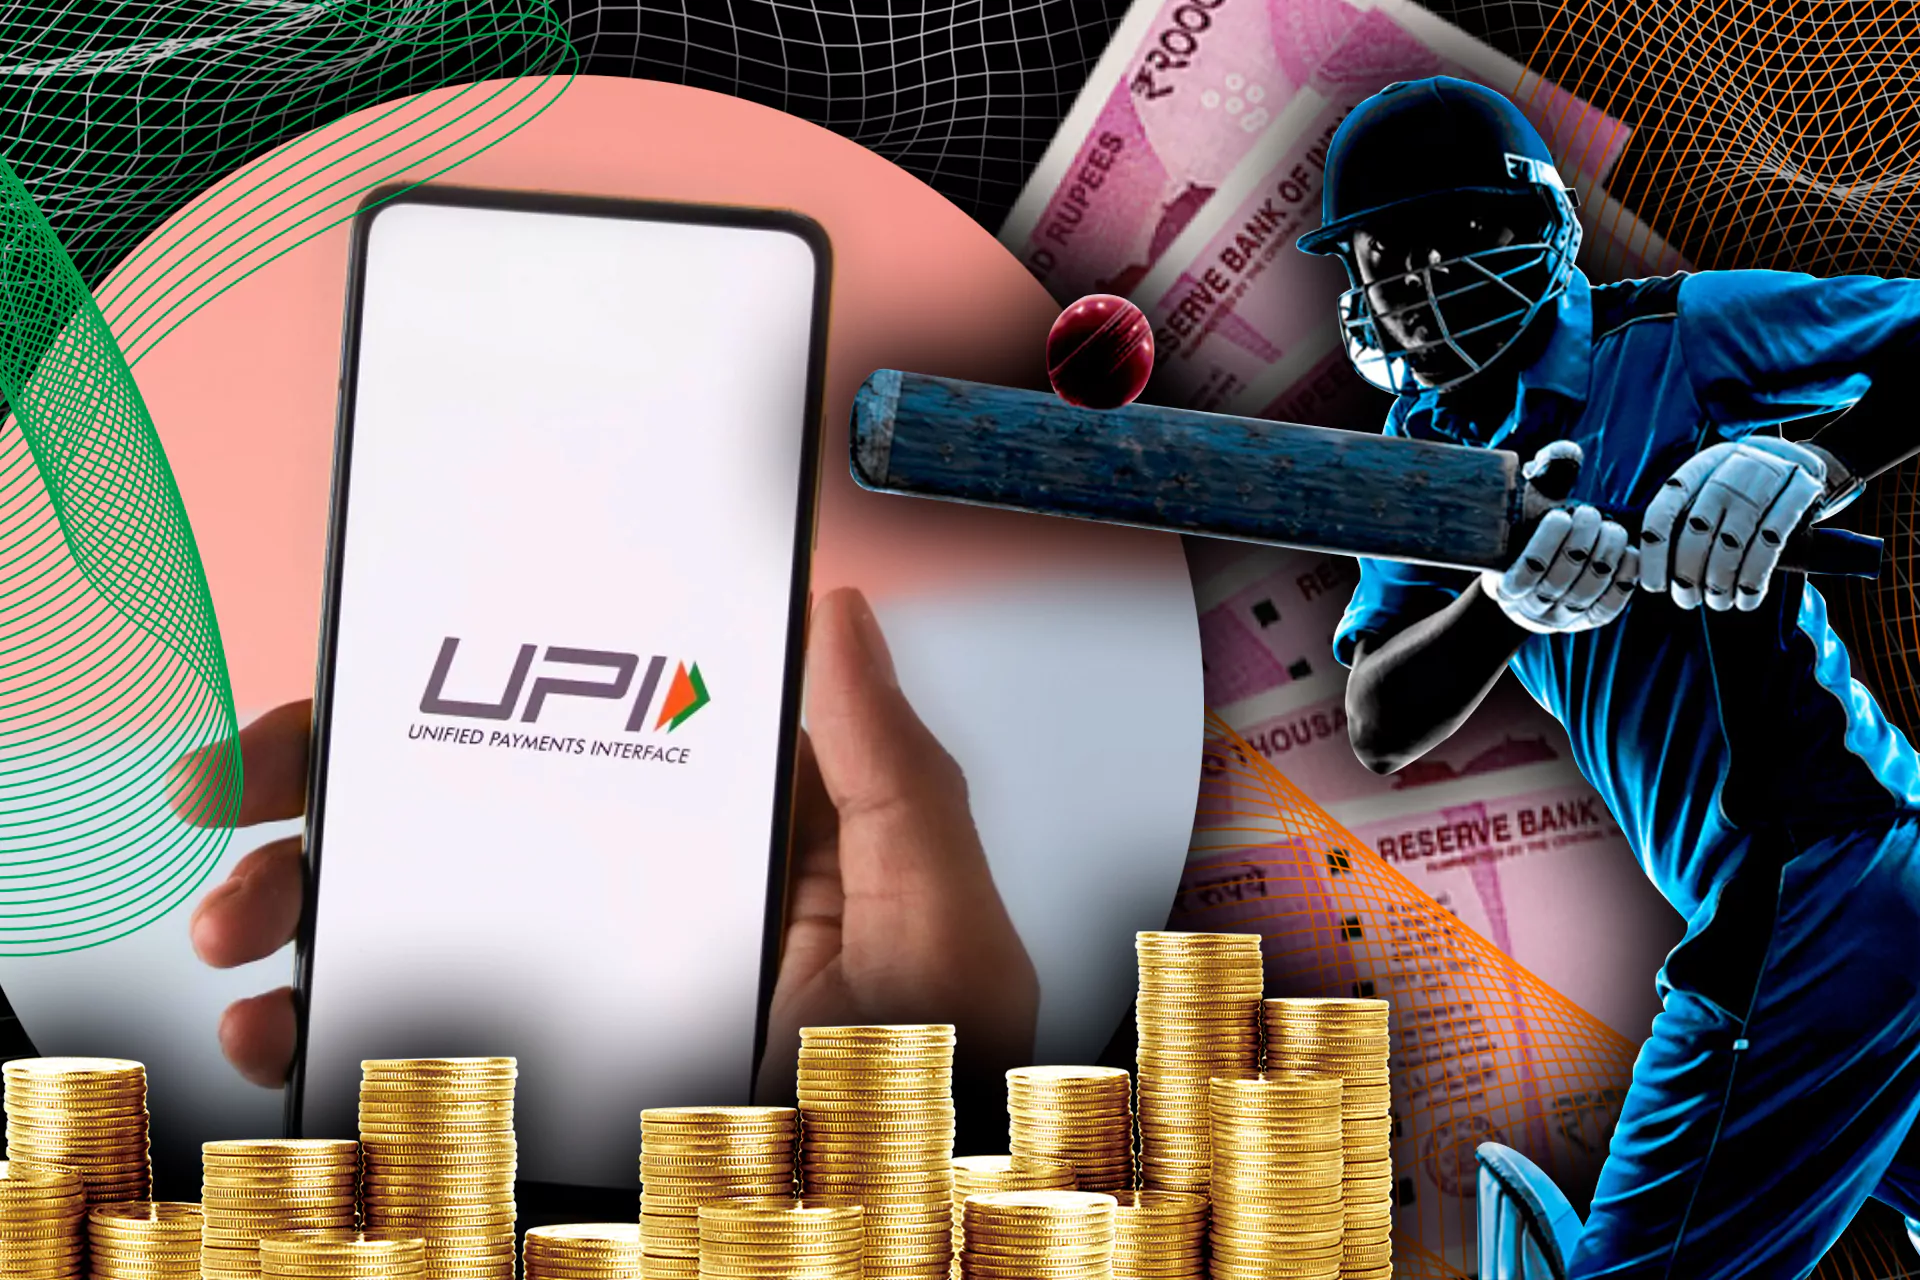 Read the rules before using UPI.